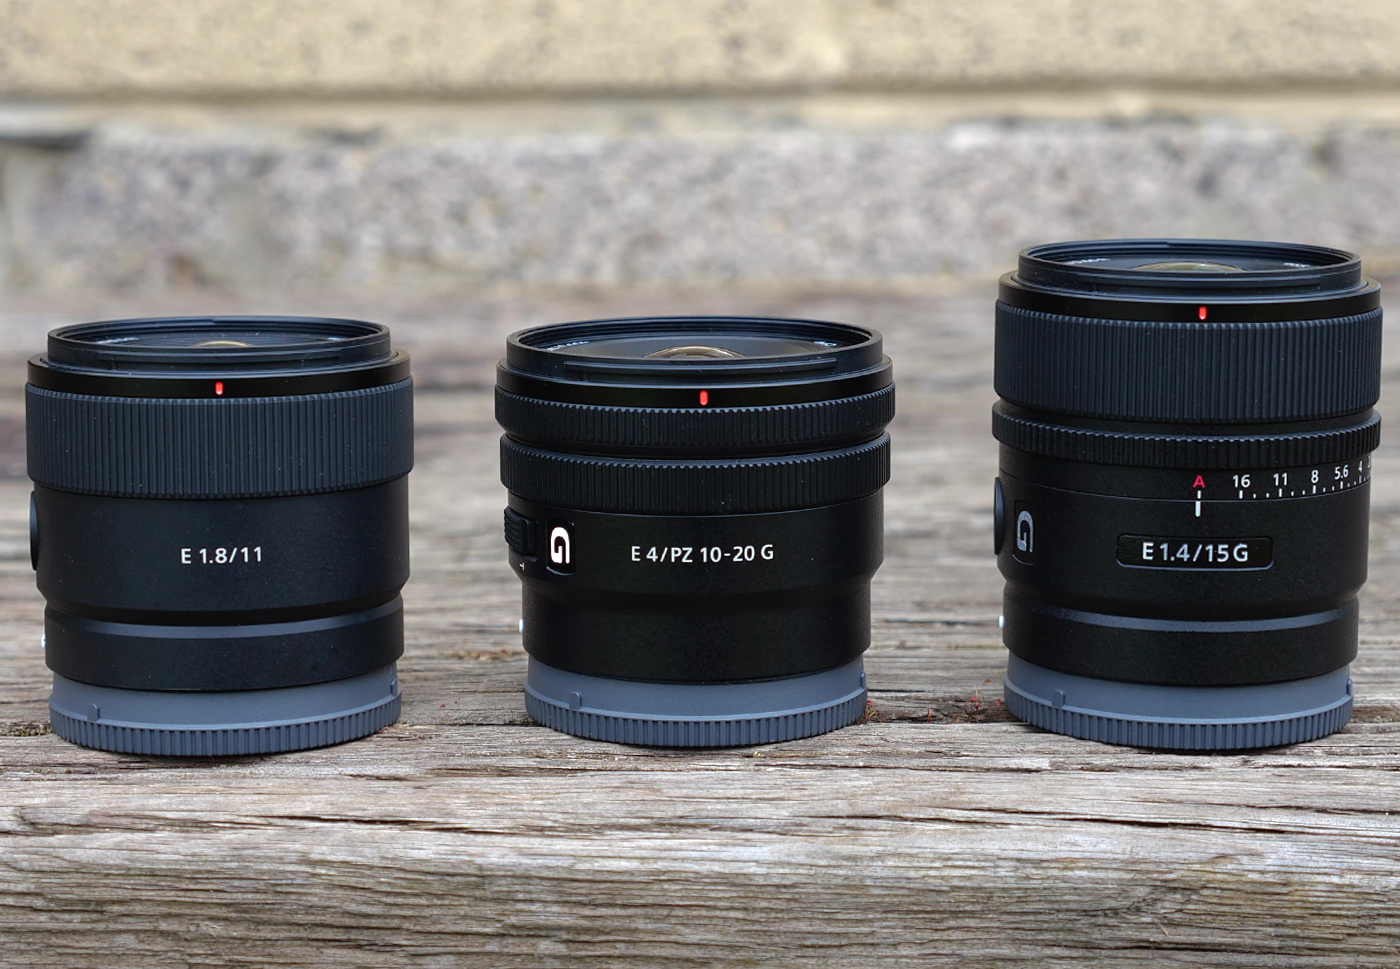 SONY ULTRA-WIDE, LARGE APERTURE APS-C PRIMES AND POWERZOOM | FIRST LOOK VIDEO